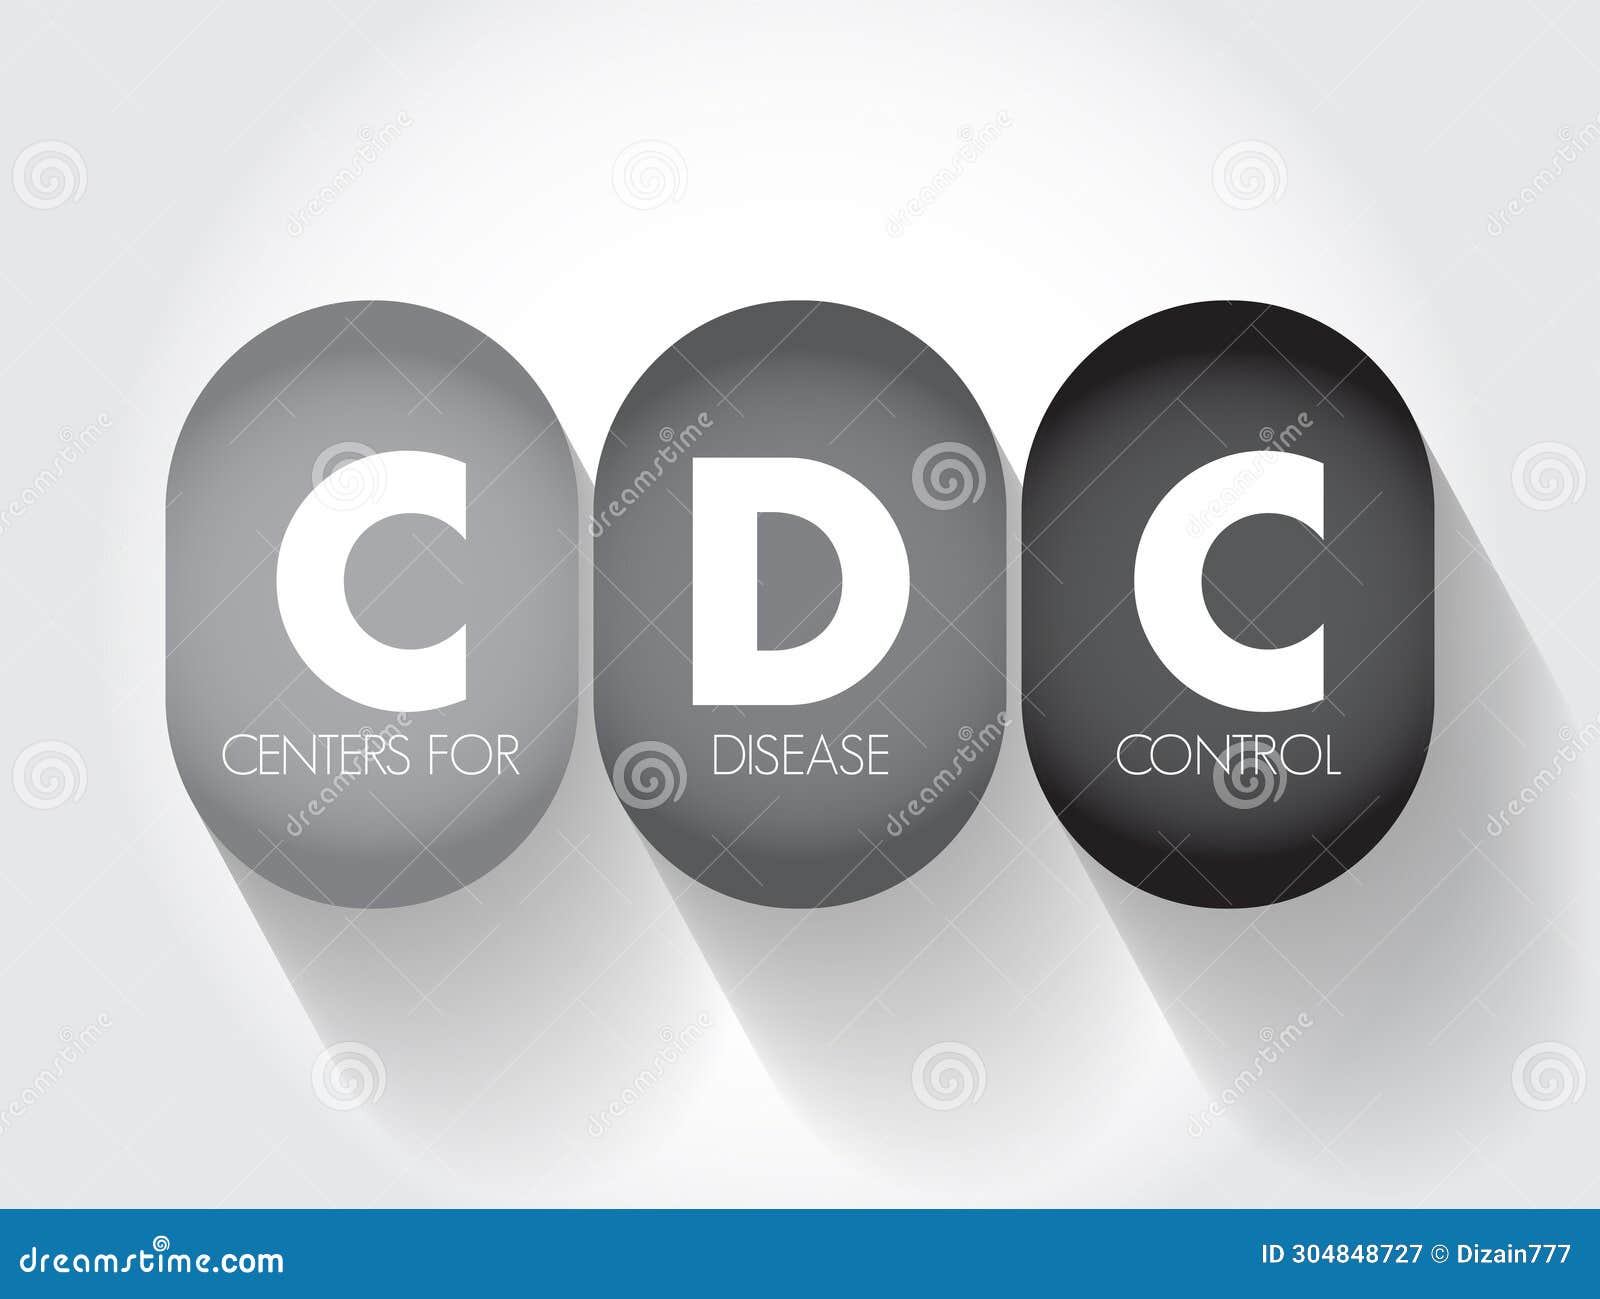 cdc - centers for disease control acronym, text concept for presentations and reports